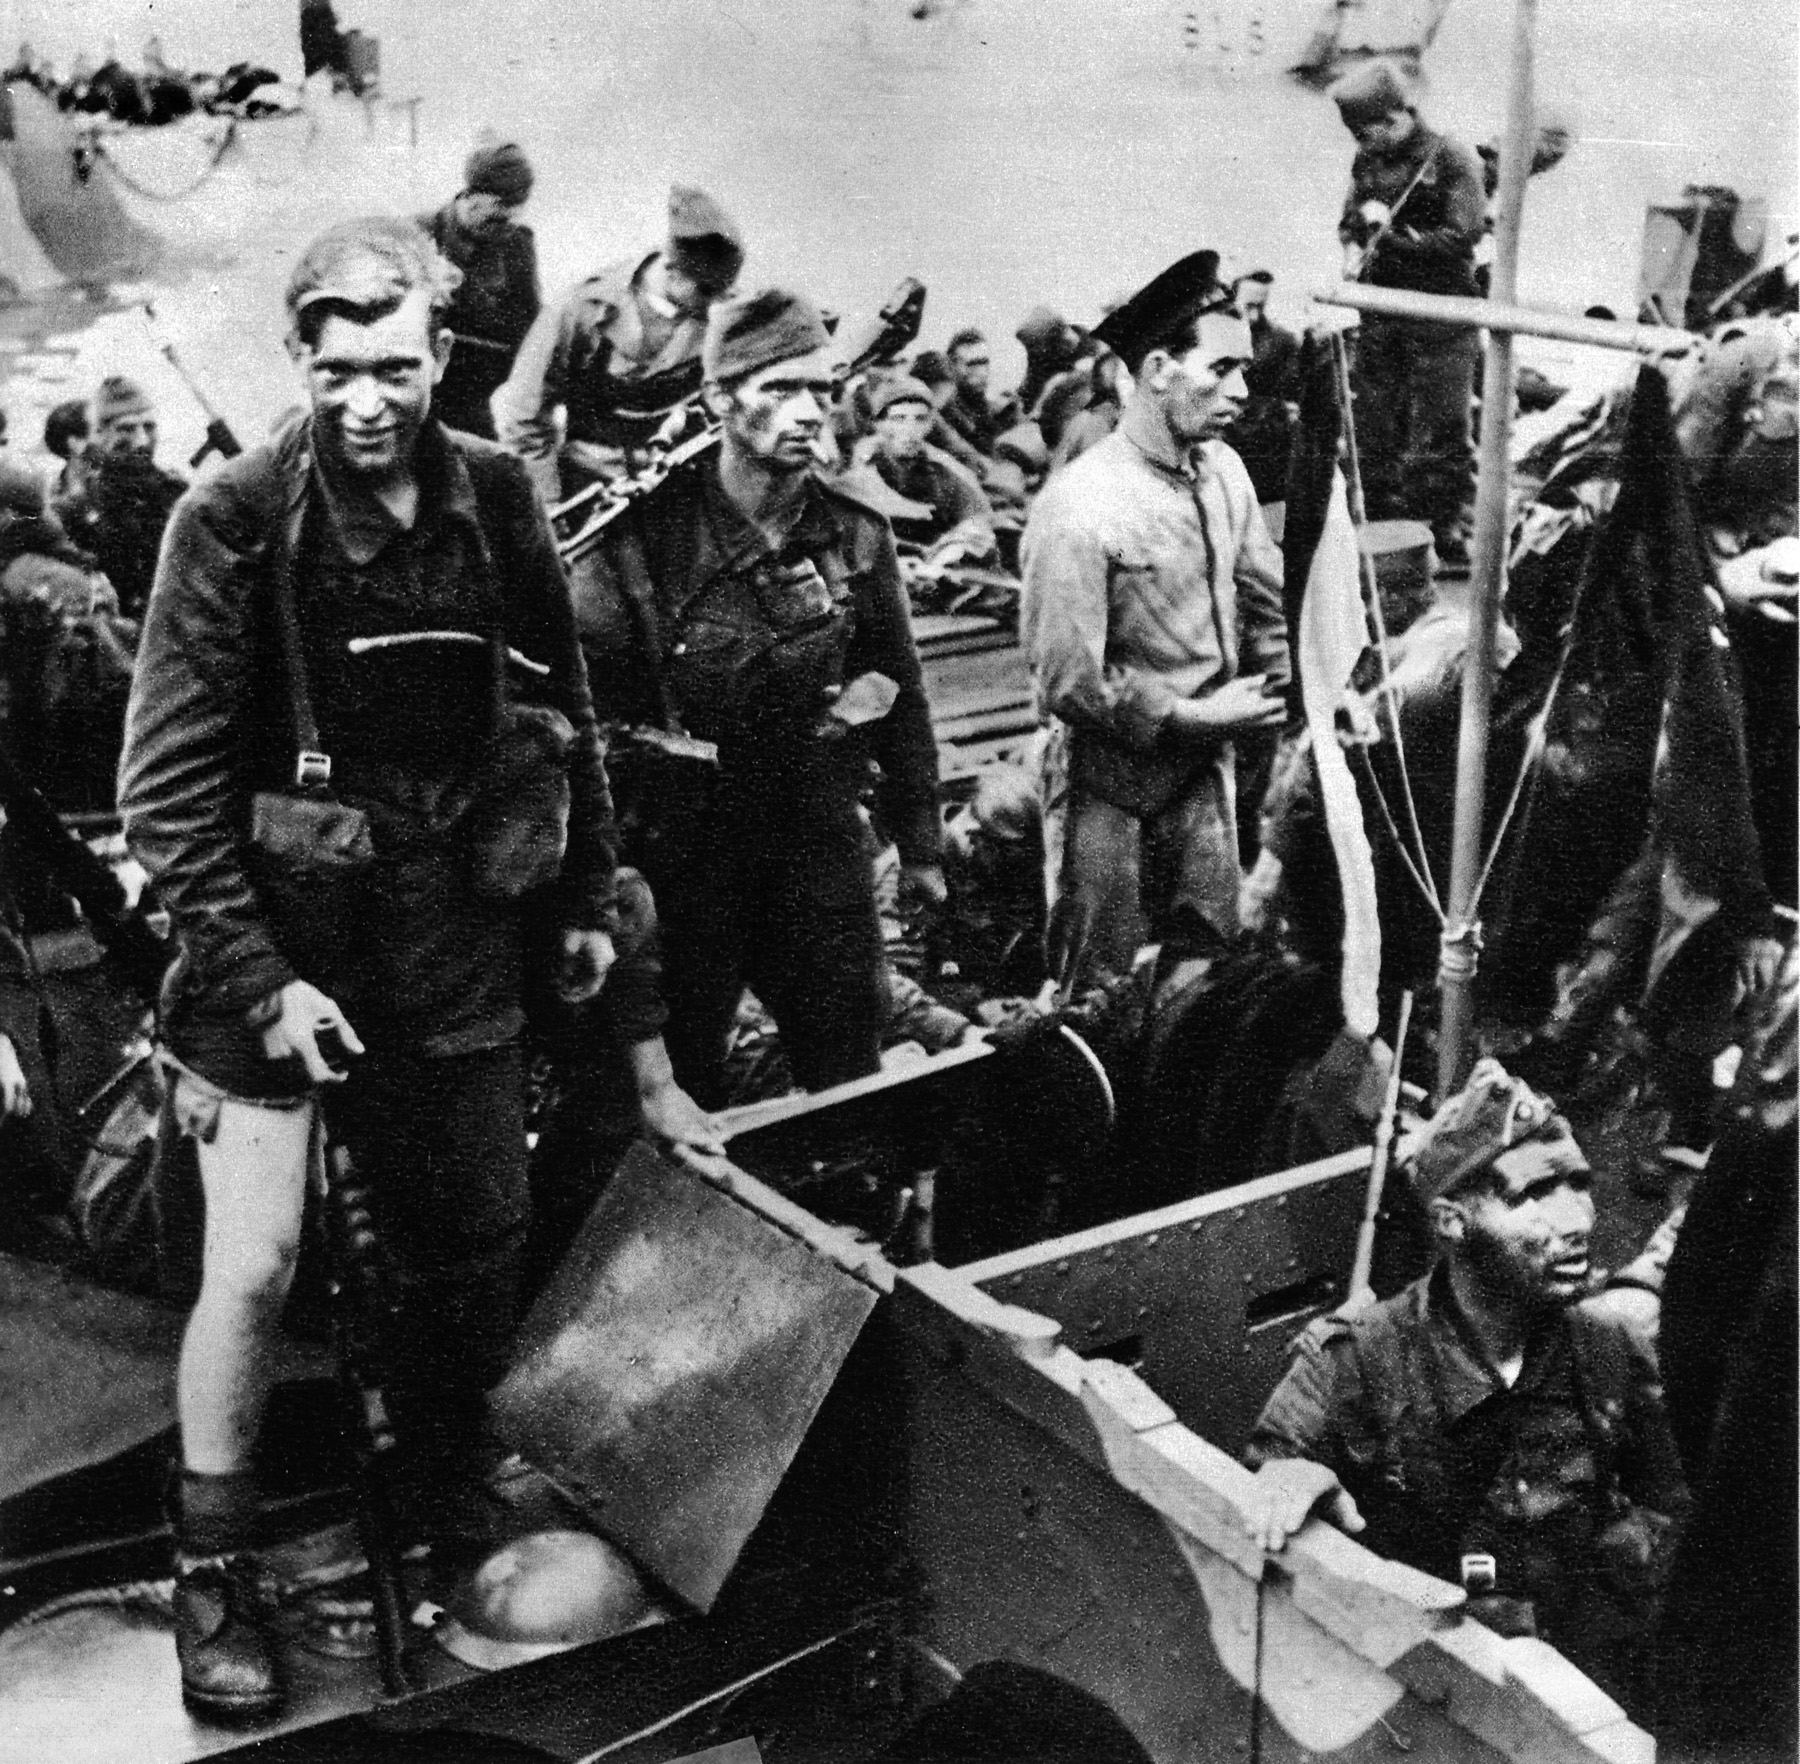 British Commandos, survivors of the disastrous Dieppe raid and looking the worse for wear, gather aboard boats taking them back to Britain, August 1942. 